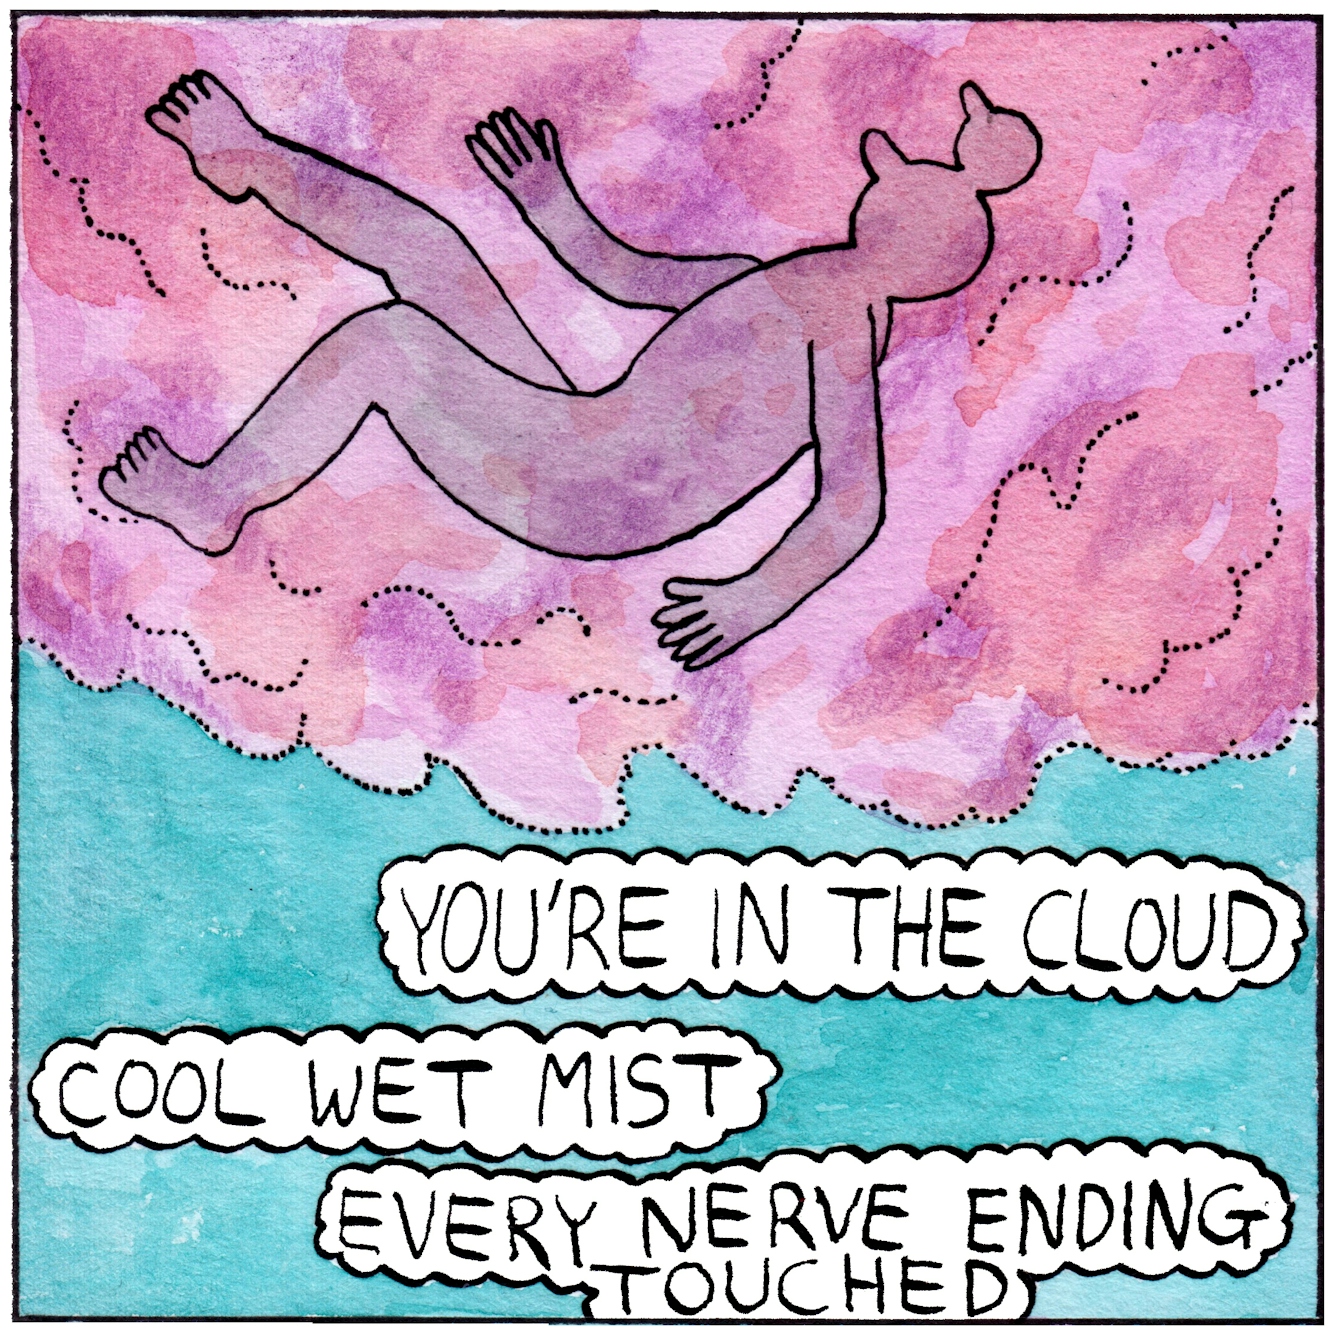 Panel three of the webcomic 'Unpaid break'. The two-headed character is floating in a large pink cloud that takes up half the panel. Just their outline is visible, lying horizontally, arms and legs outstretched. Below the cloud, in the turquoise blue sky the text bubbles say "You're in the cloud", "Cool wet mist", "Every nerve ending touched".